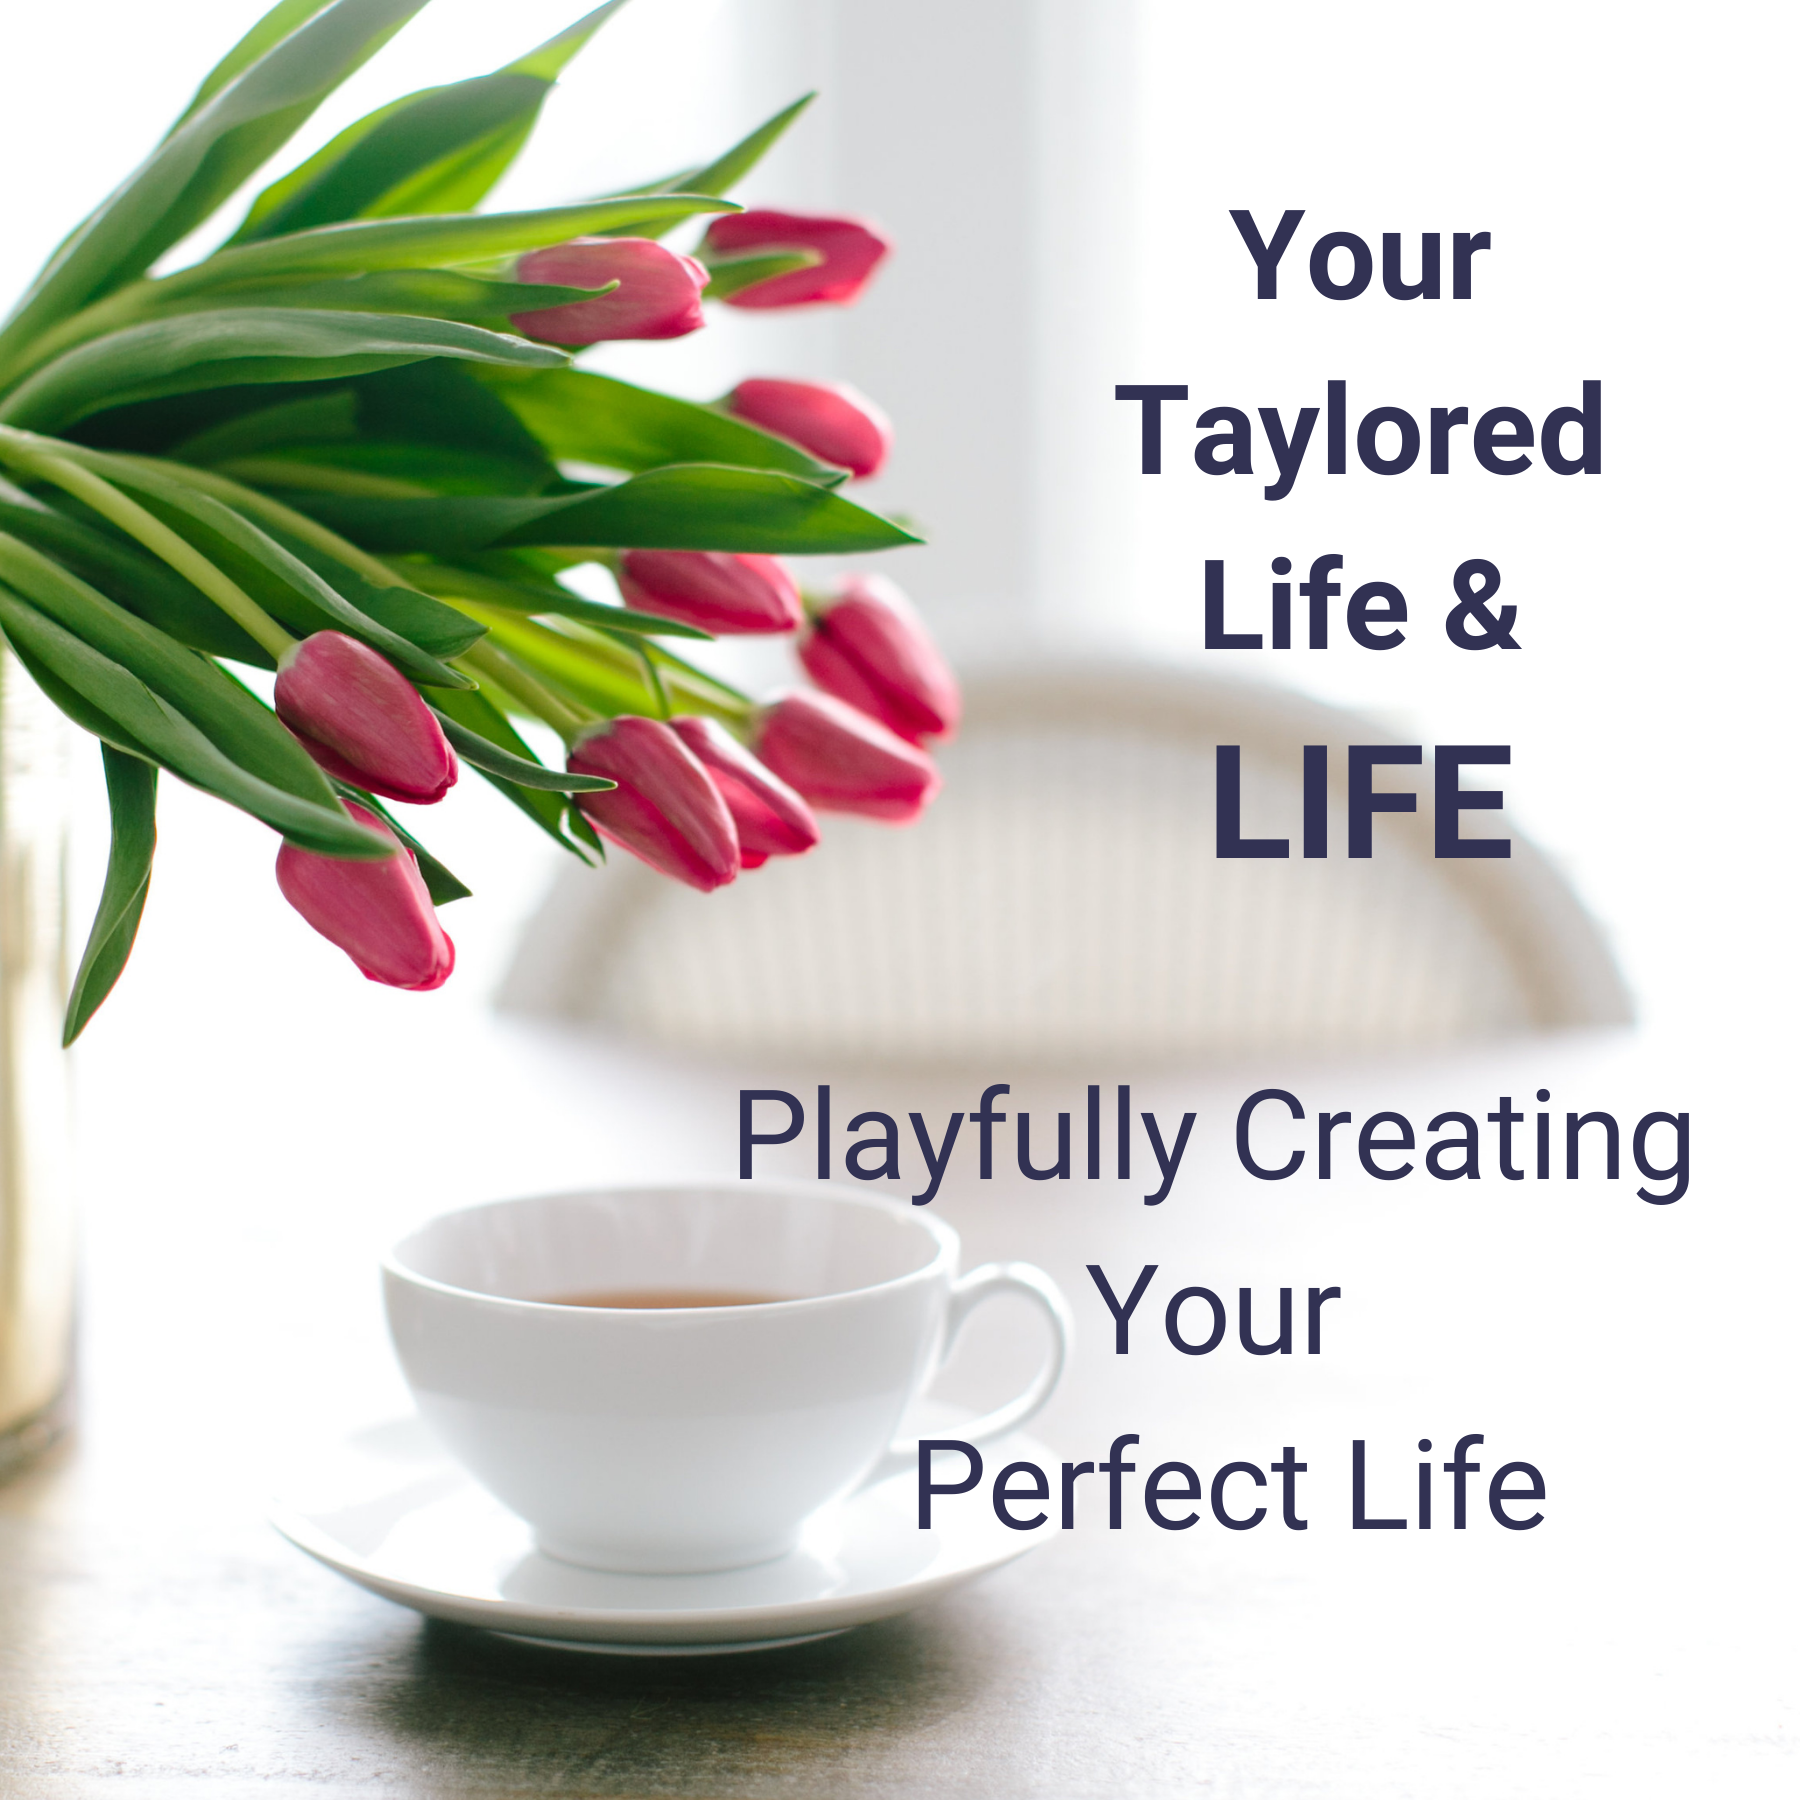 Your Taylored Life & Life: Playfully creating your perfect life.